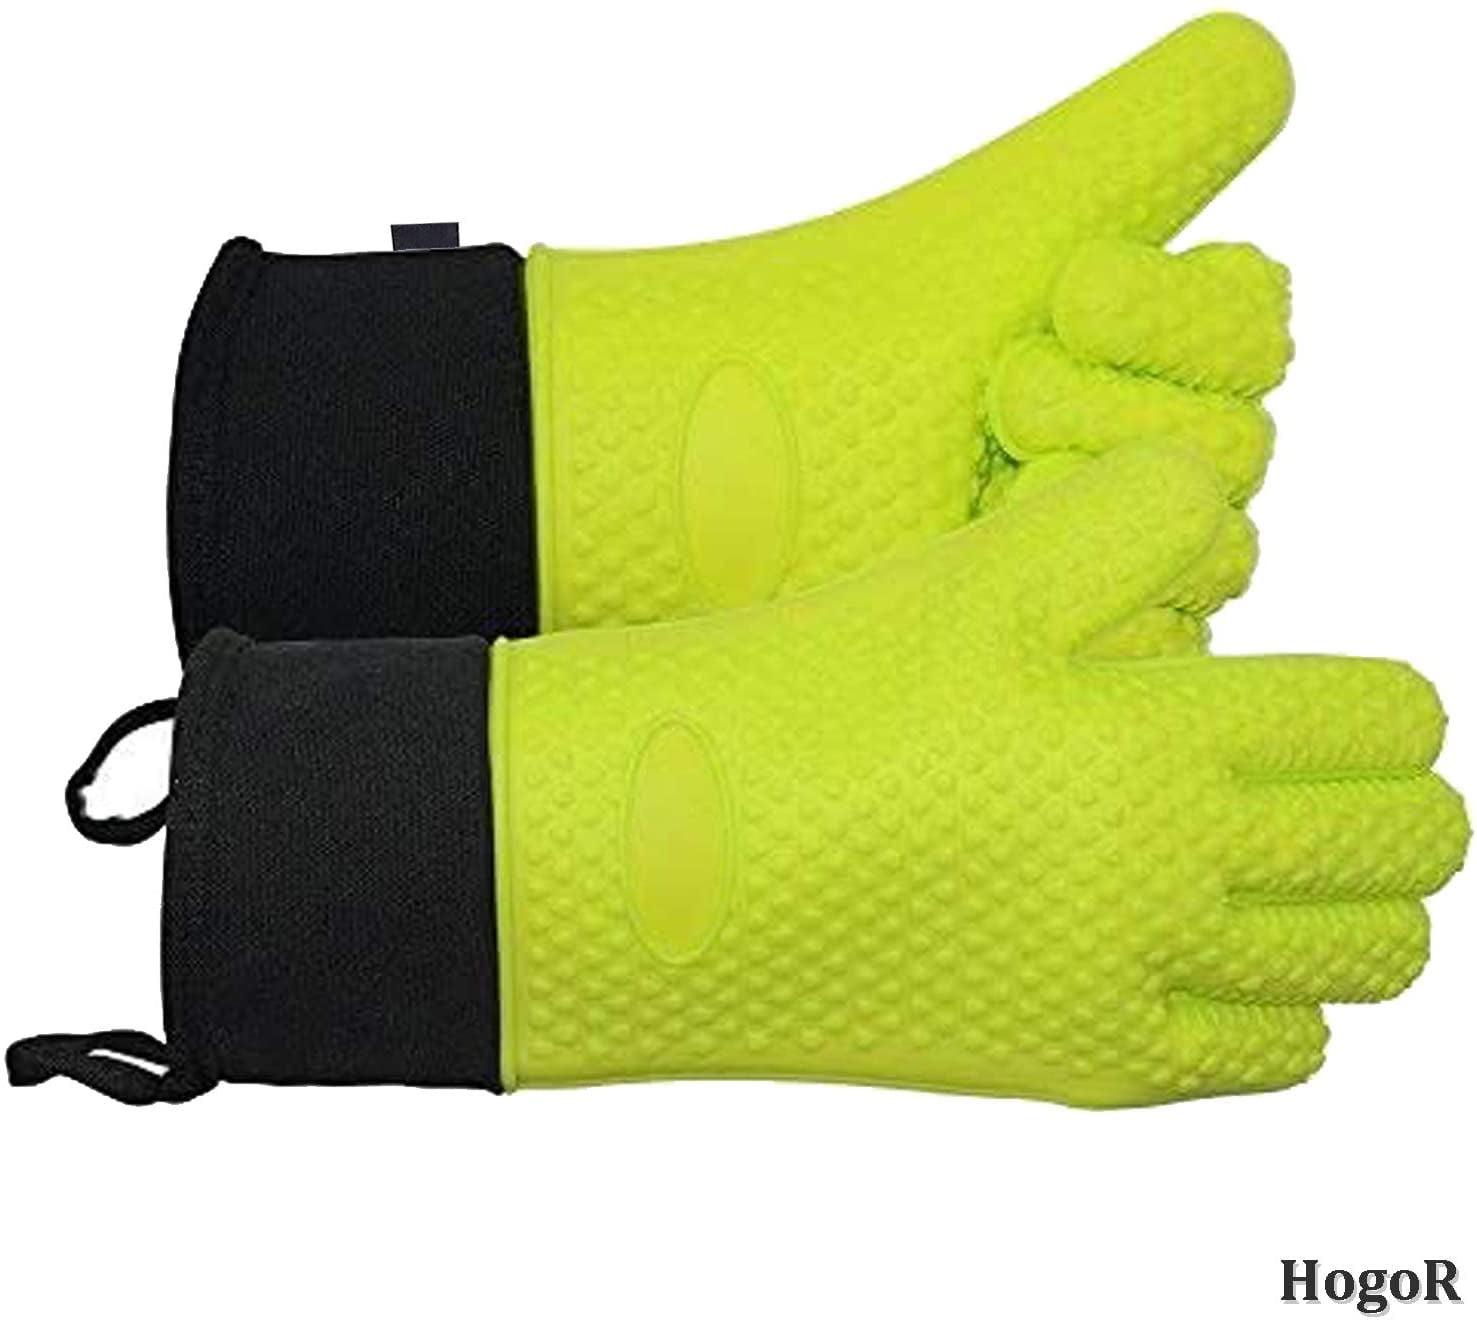 2 Pack, Green HARORBAY Silicone Oven Mitts Heat Resistant Cooking Gloves Extra Long Cotton for Kitchen Baking Cooking Grilling Barbecue Microwave Machine 